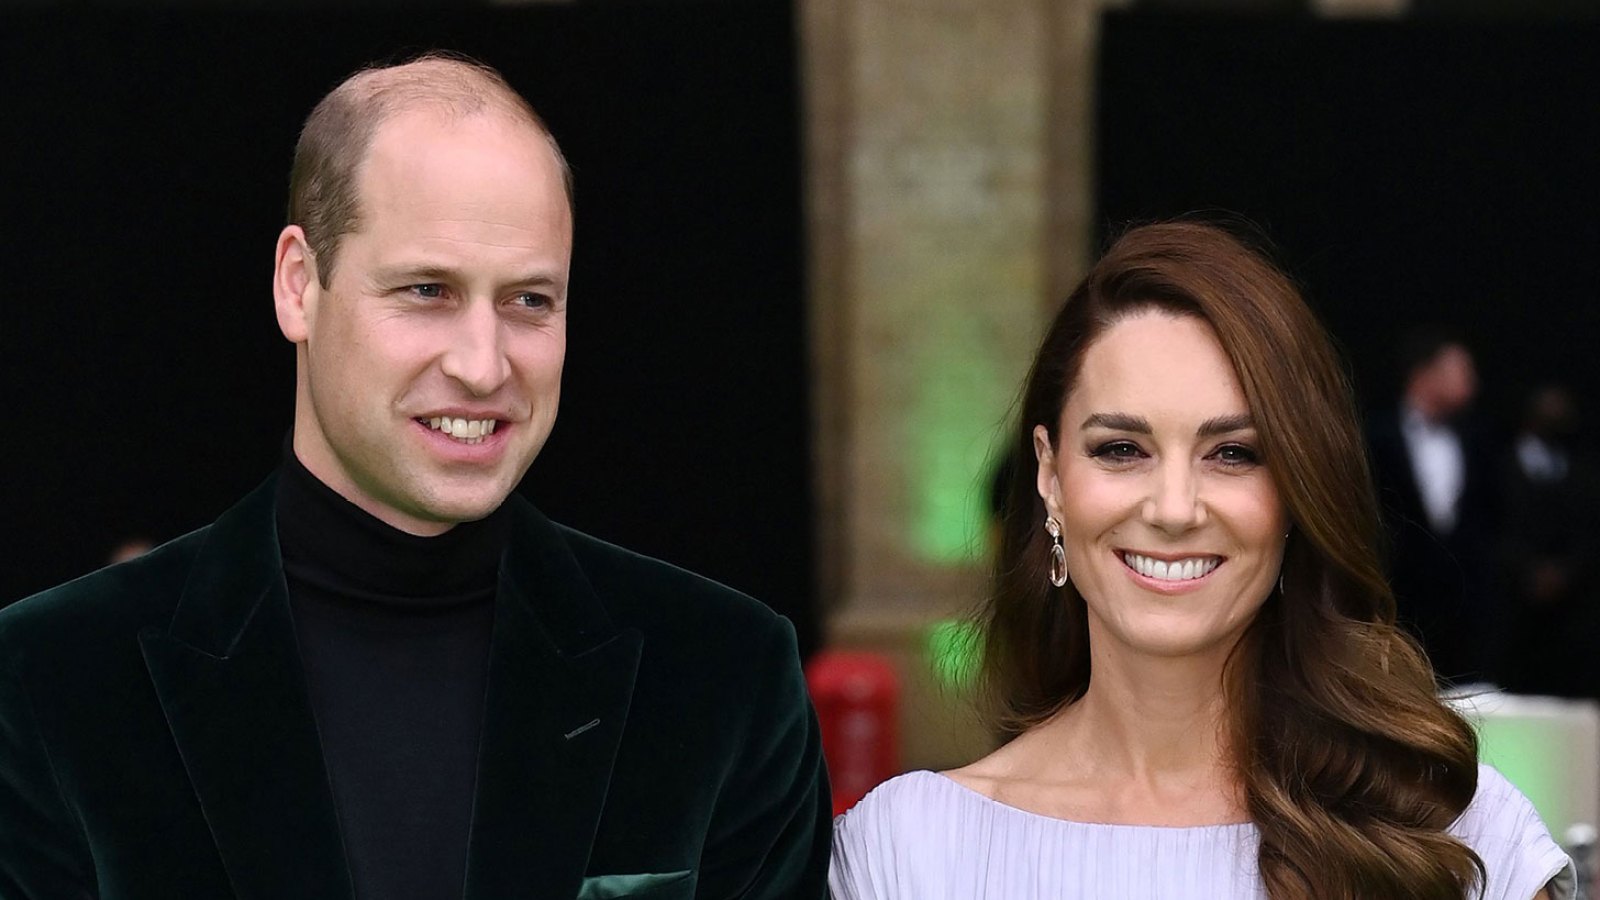 Prince William and Duchess Kate Behaved Just Like Any Married Couple During Anniversary Photo Shoot